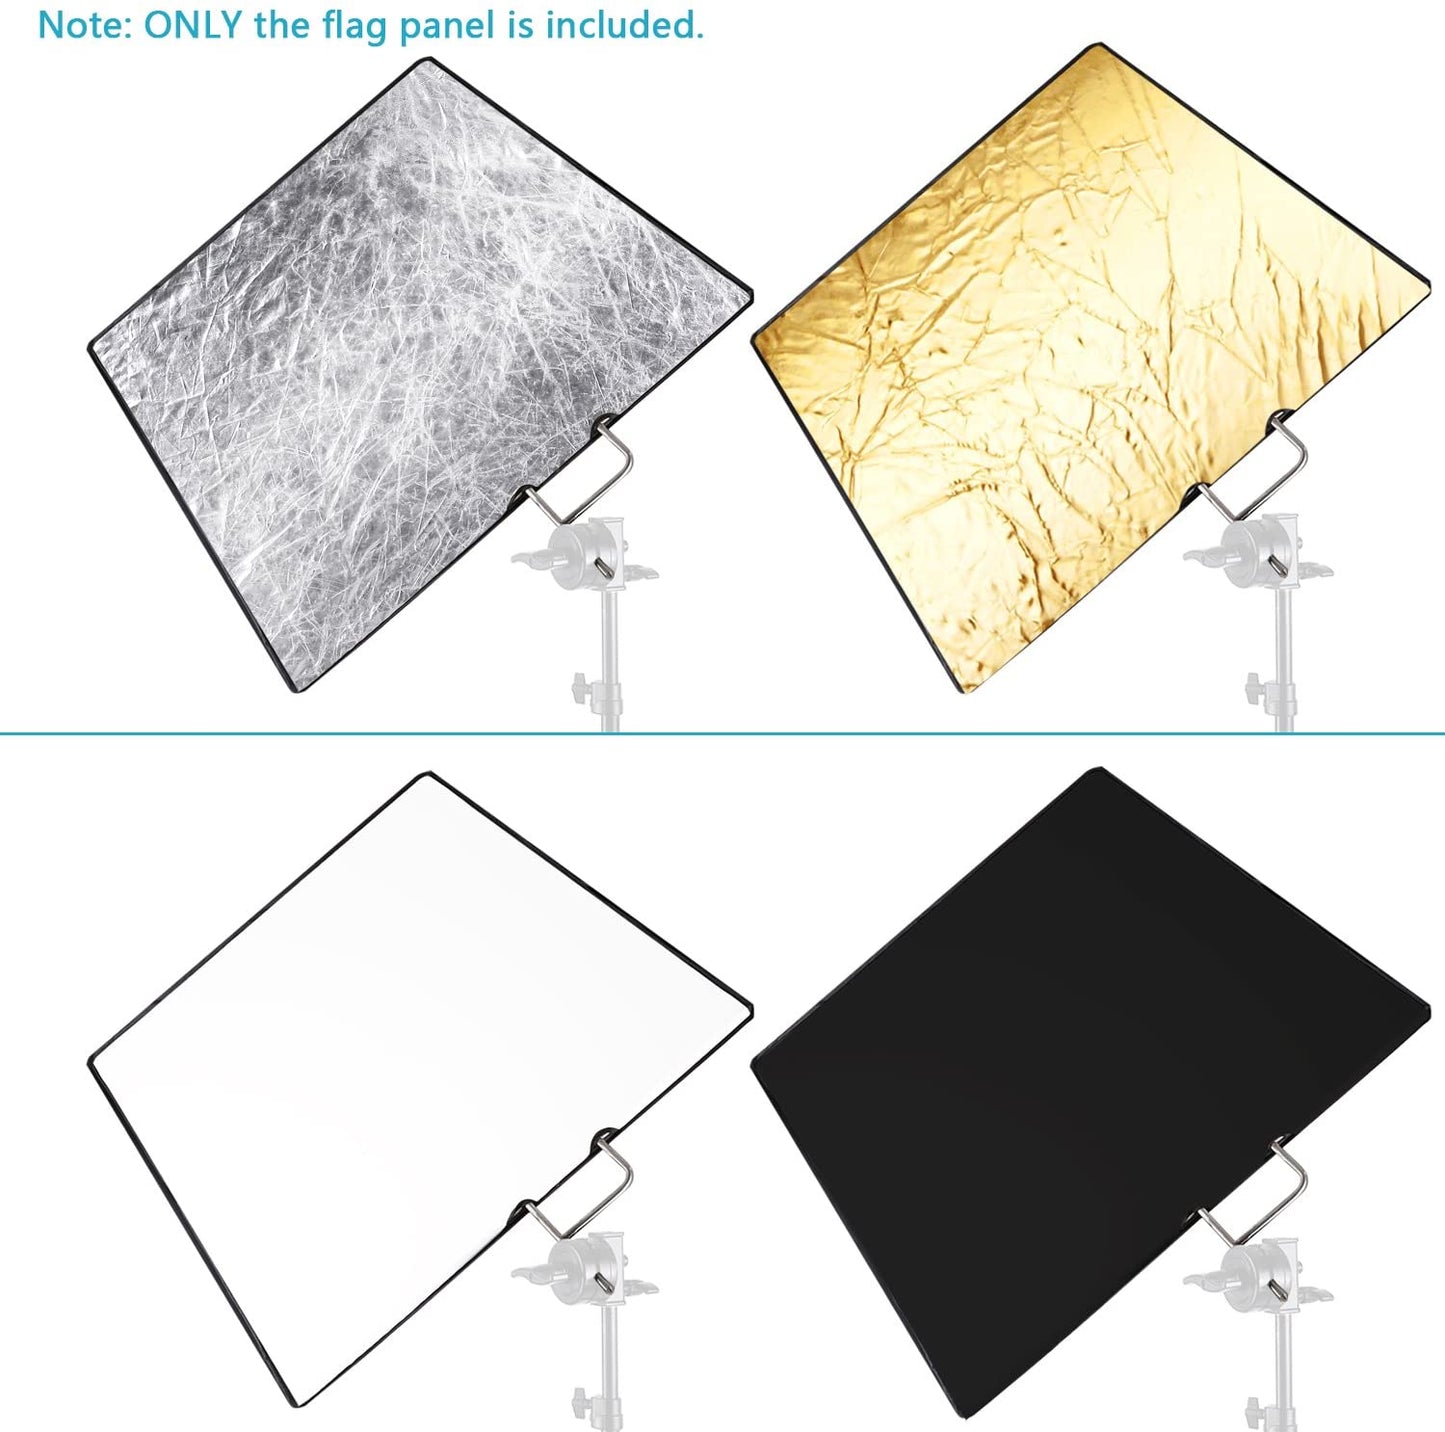 Pxel RF-7590 4-in-1 Metal Flag Panel Set Reflector with Reversible Soft White, Black, Silver and Gold Cover Cloth Scrim Flag for Photo Video Studio Photography